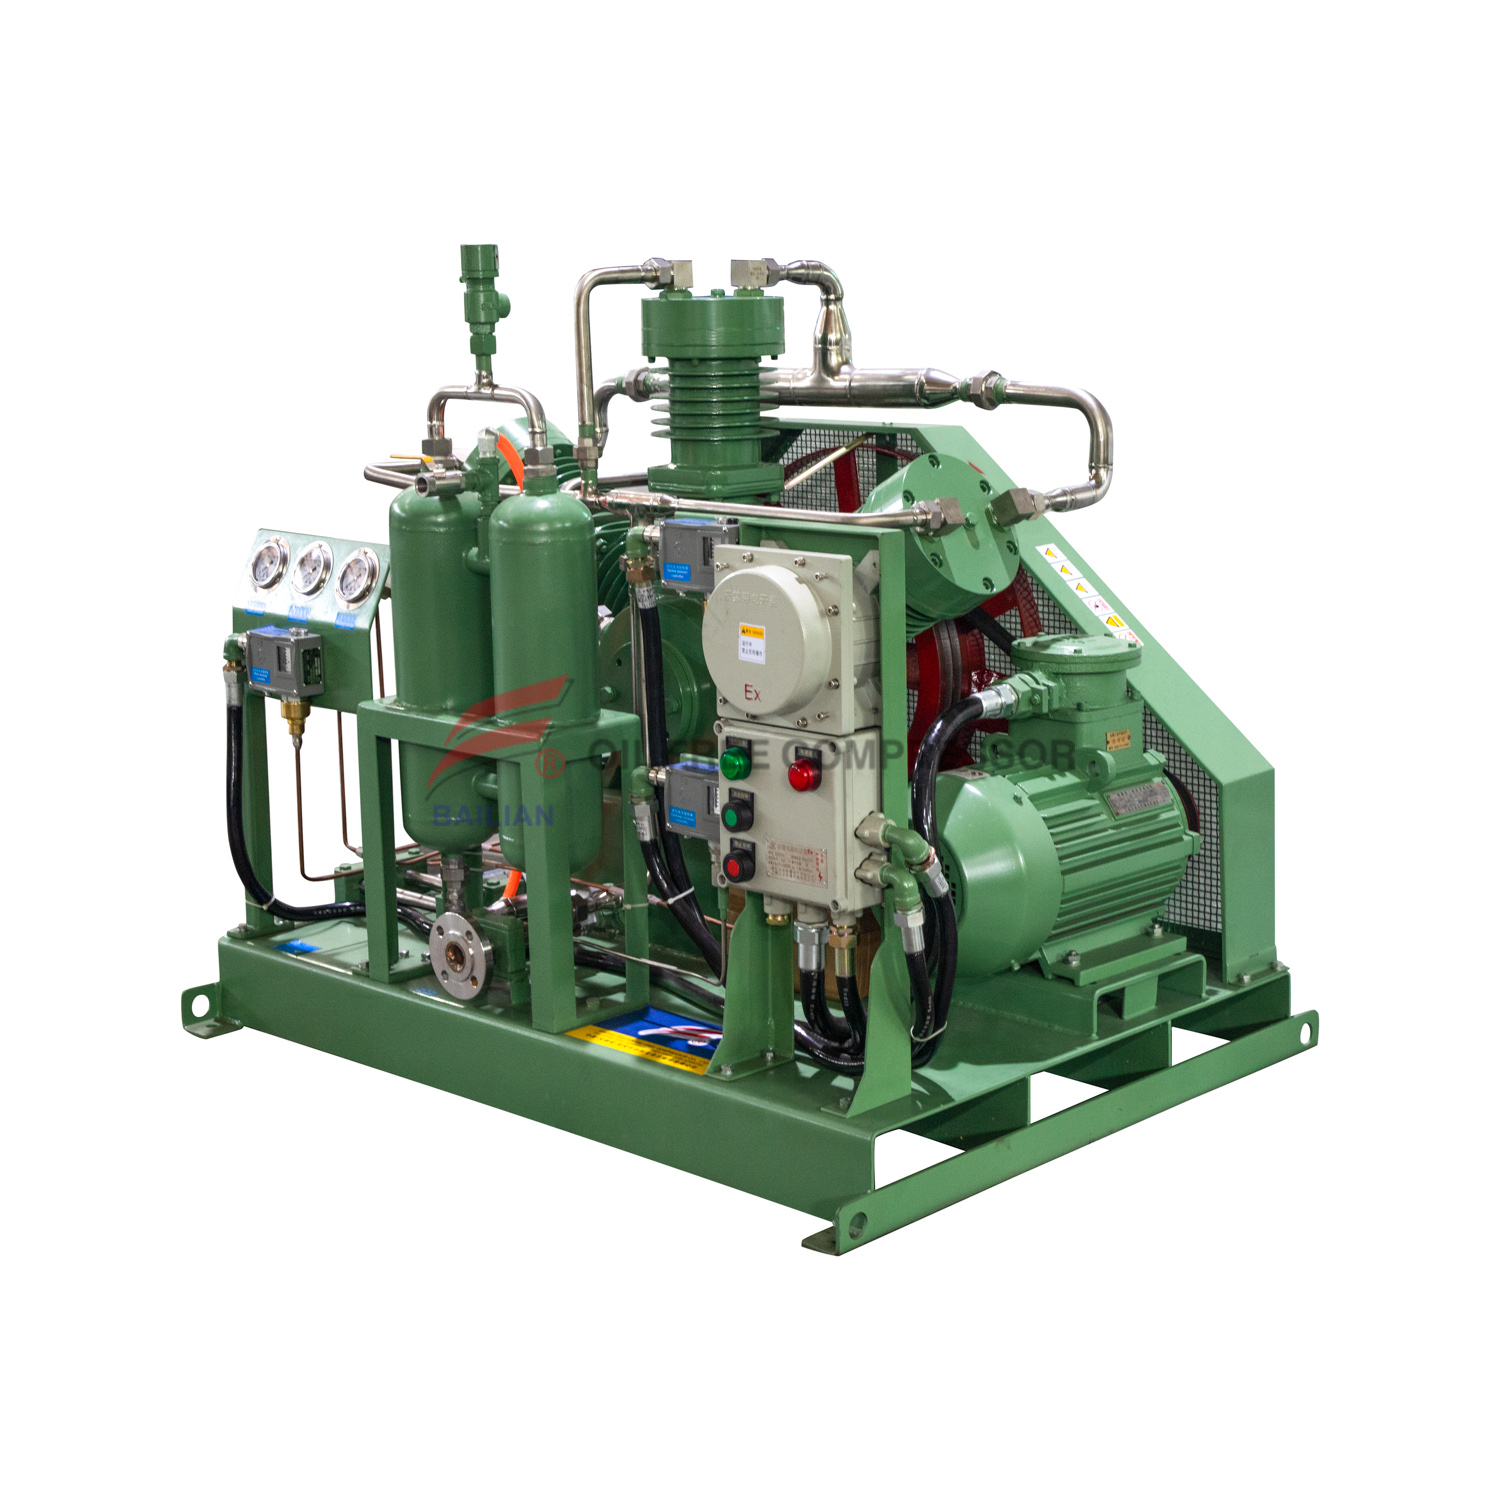 ZWH-350/1-25 Vertical Oil-Free Lubrication Sled Mounted Type H2 Compressor 